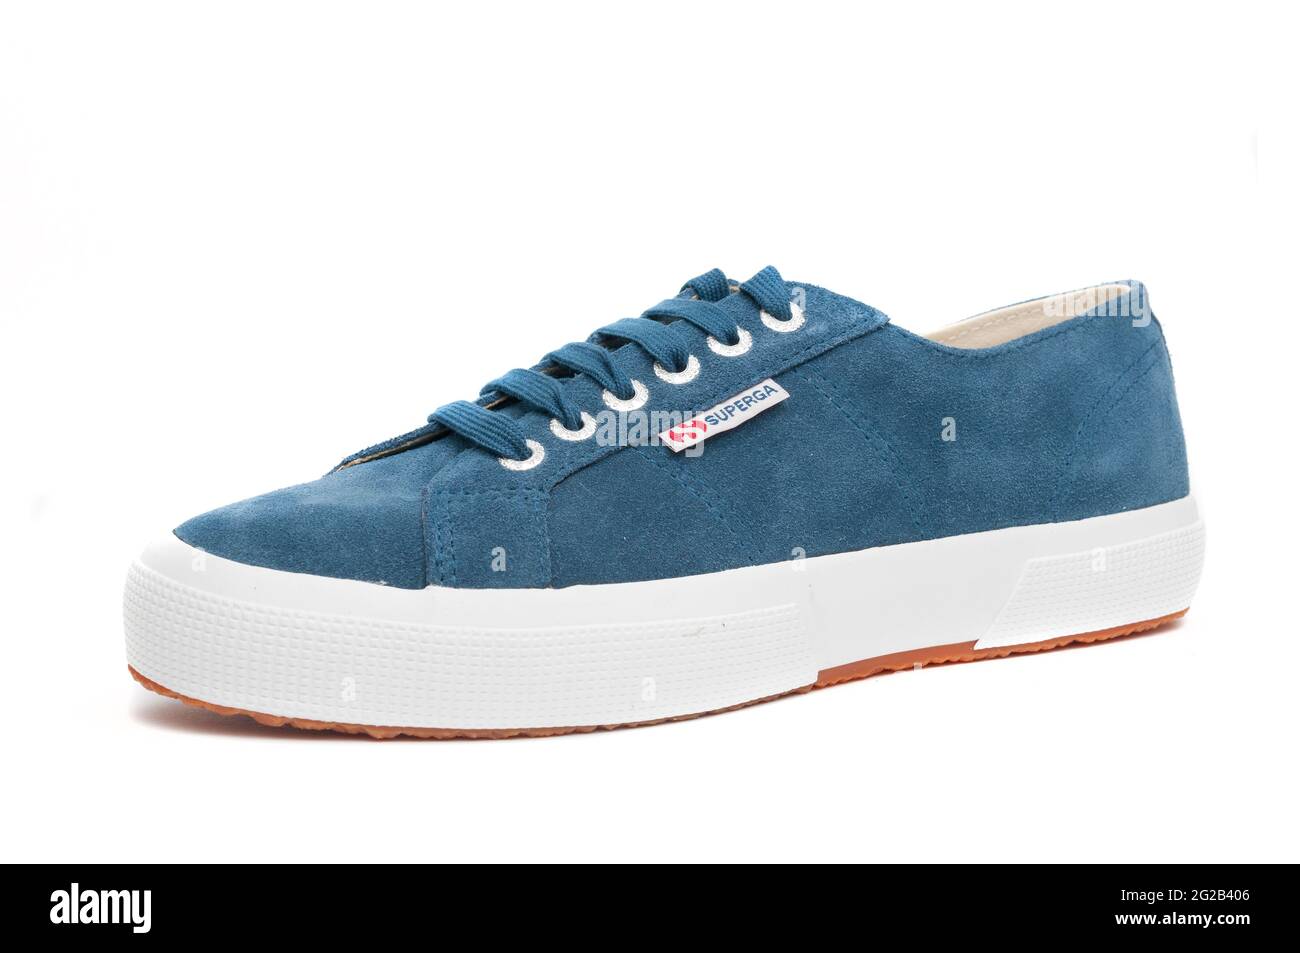 Carrara, Italy - June 09, 2021 - Blue Superga casual sneaker isolated on white background Stock Photo